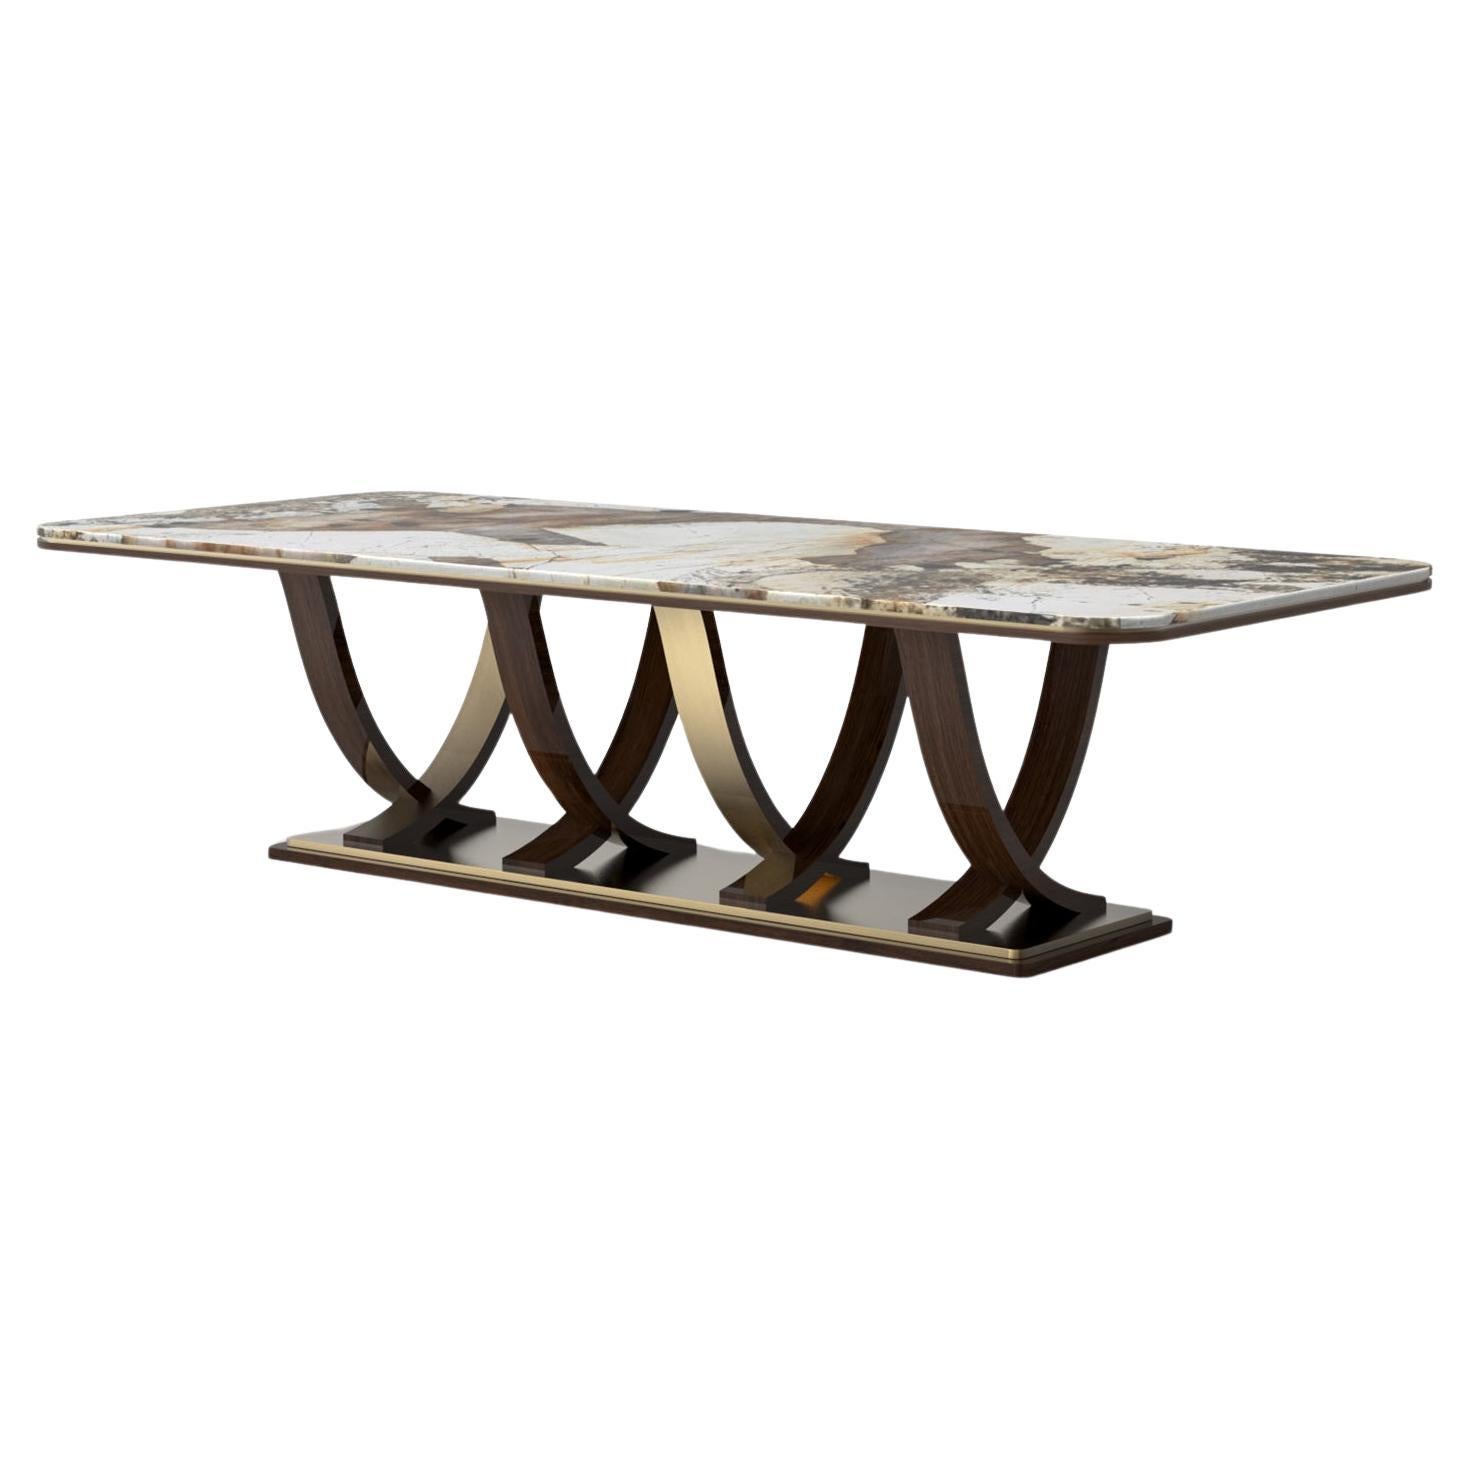 Art Deco Style Fontaine Dining Table Patagonia Granite Handmade by Greenapple